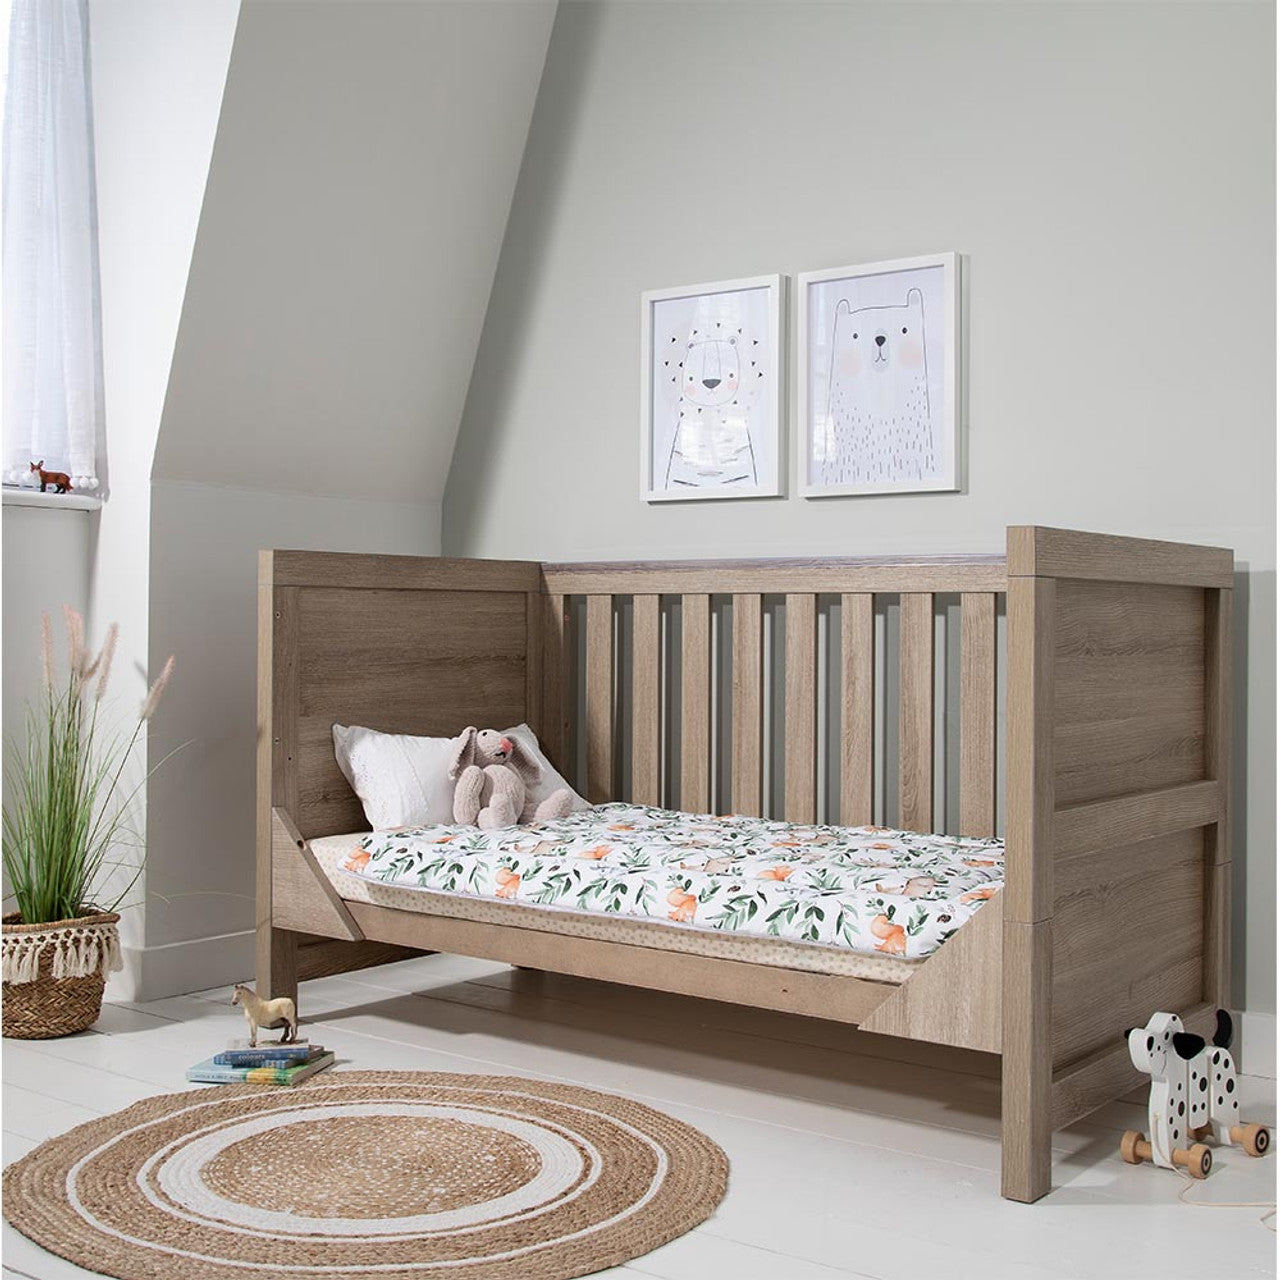 Tutti Bambini Modena Cot Bed - Oak - For Your Little One